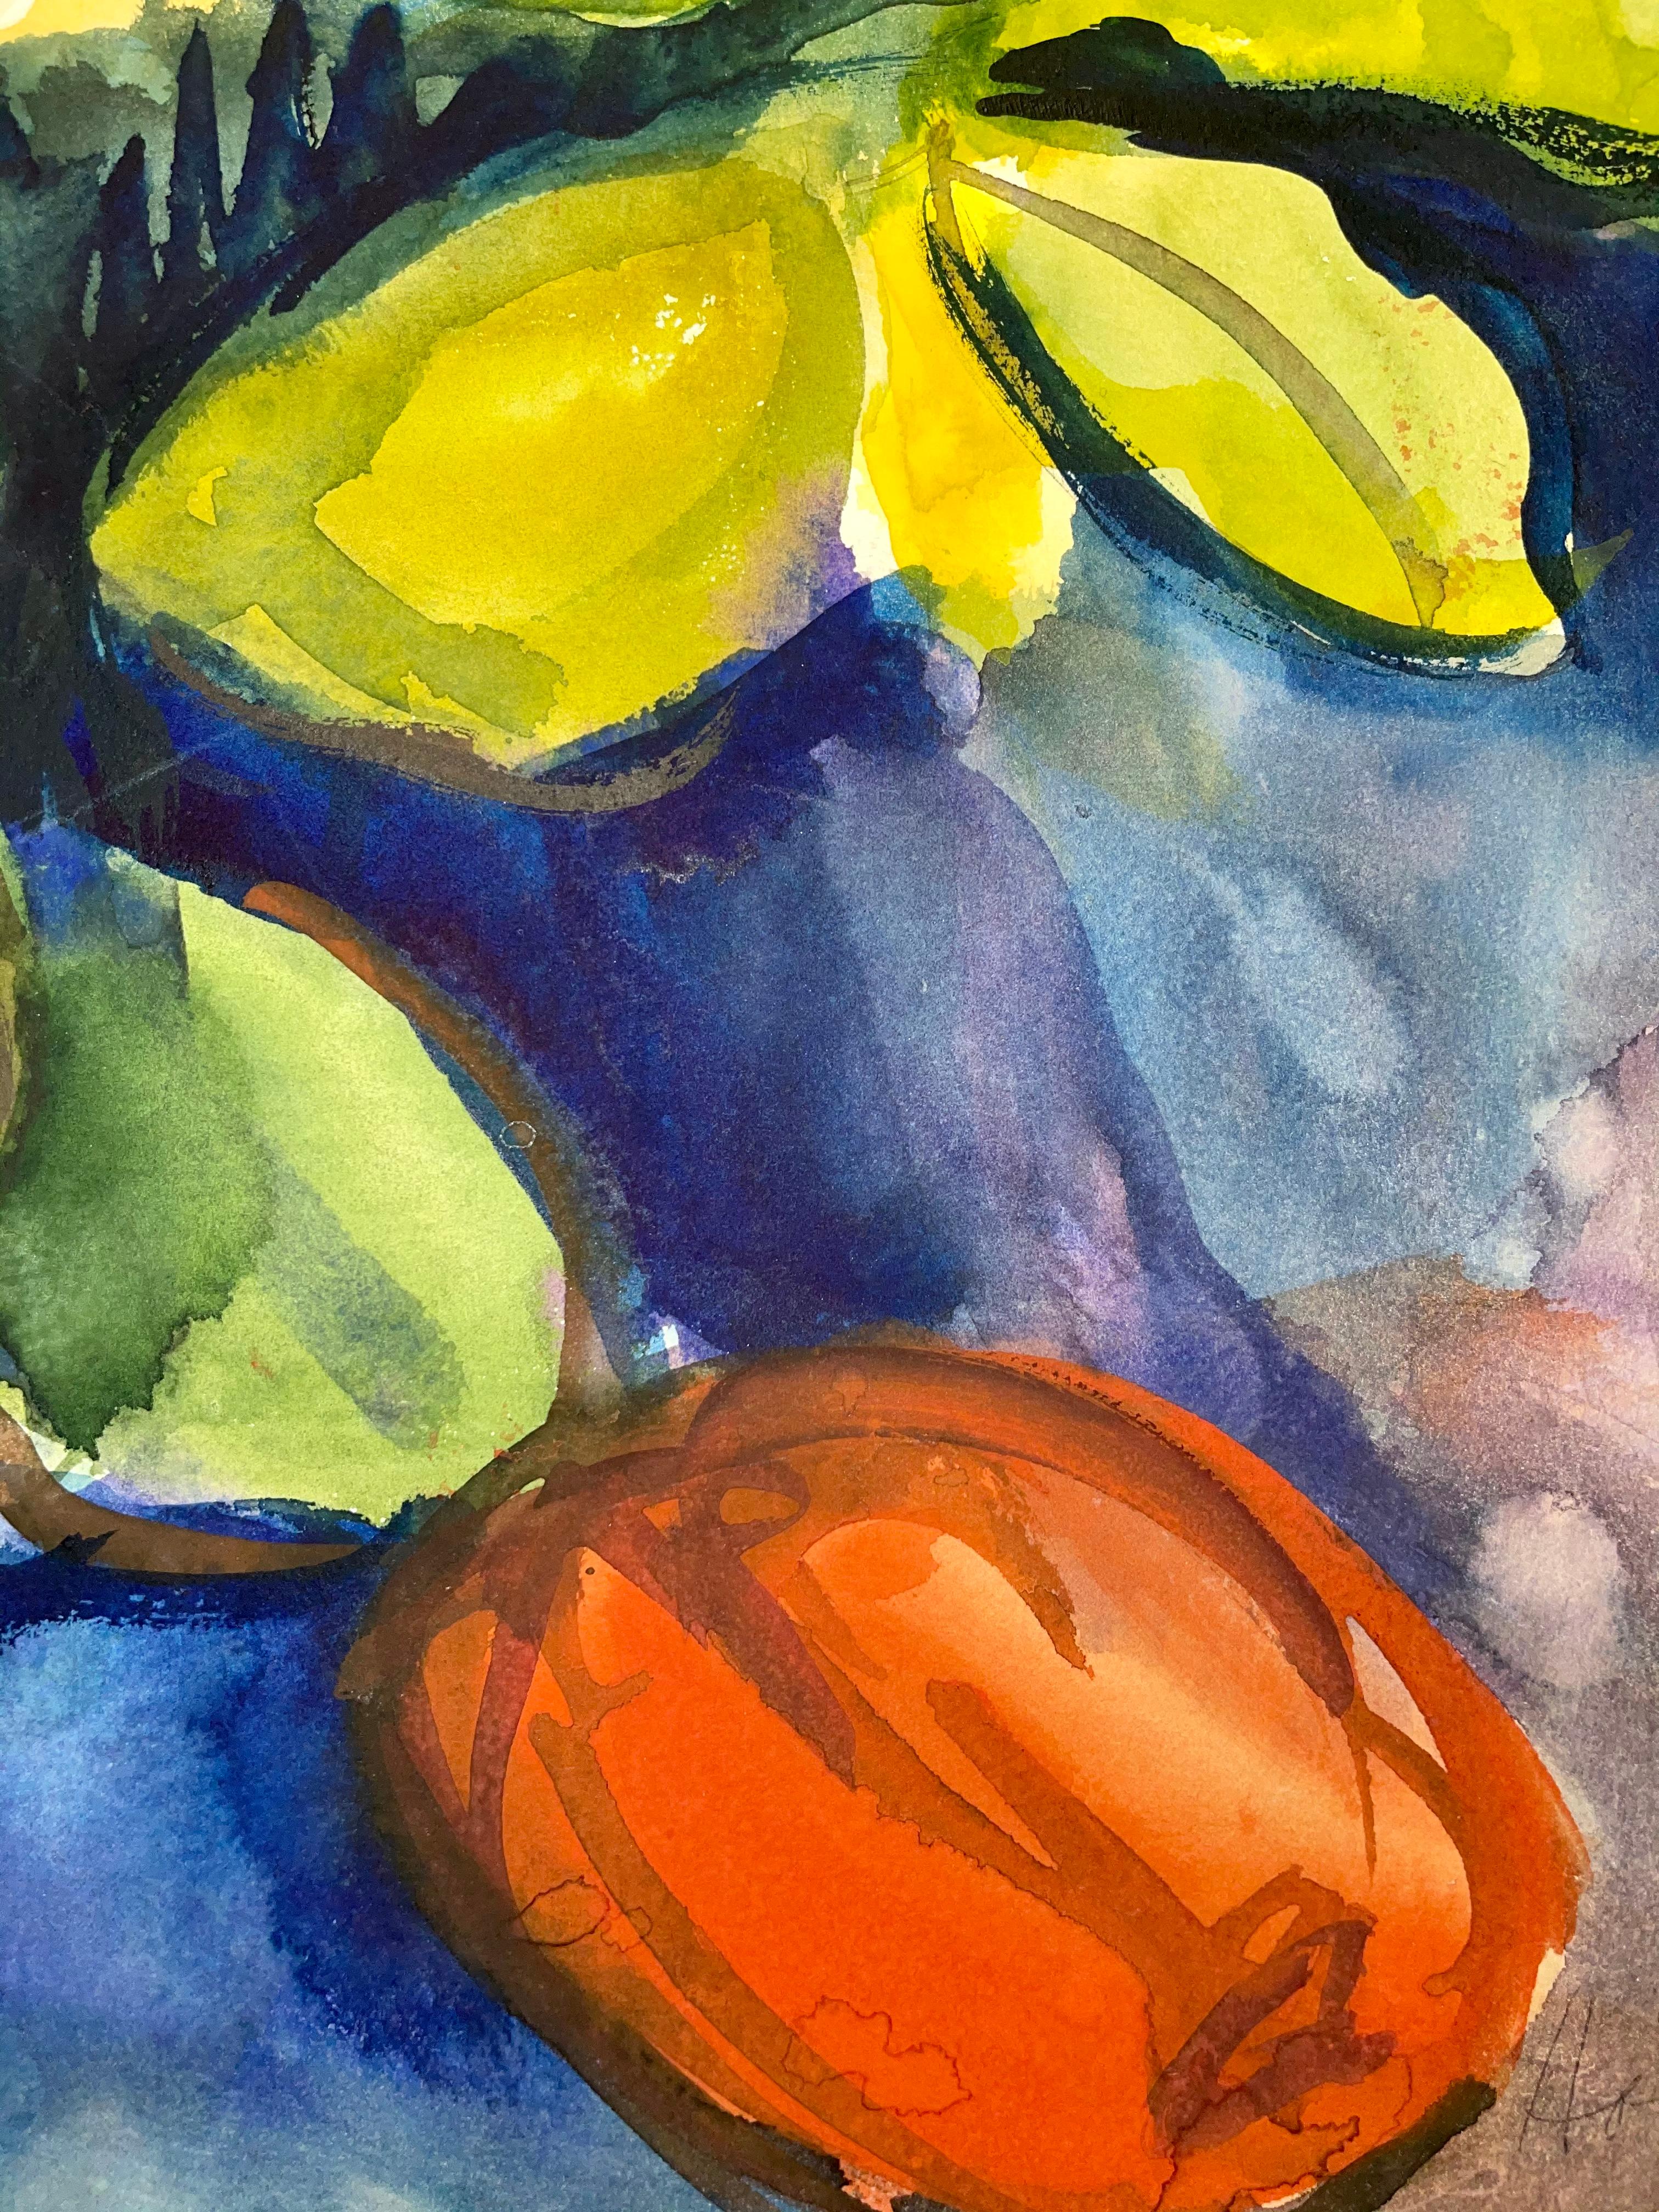 Artist: Ian Hornak (1944-2002)
Title: Untitled (Abstract Still Life with Flowers, Plants and Peppers)
Year: 1963
Medium: Watercolor on heavy archival paper
Size: 29.5 x 21 inches
Condition: Good
Provenance: Estate of Ian Hornak, East Hampton,